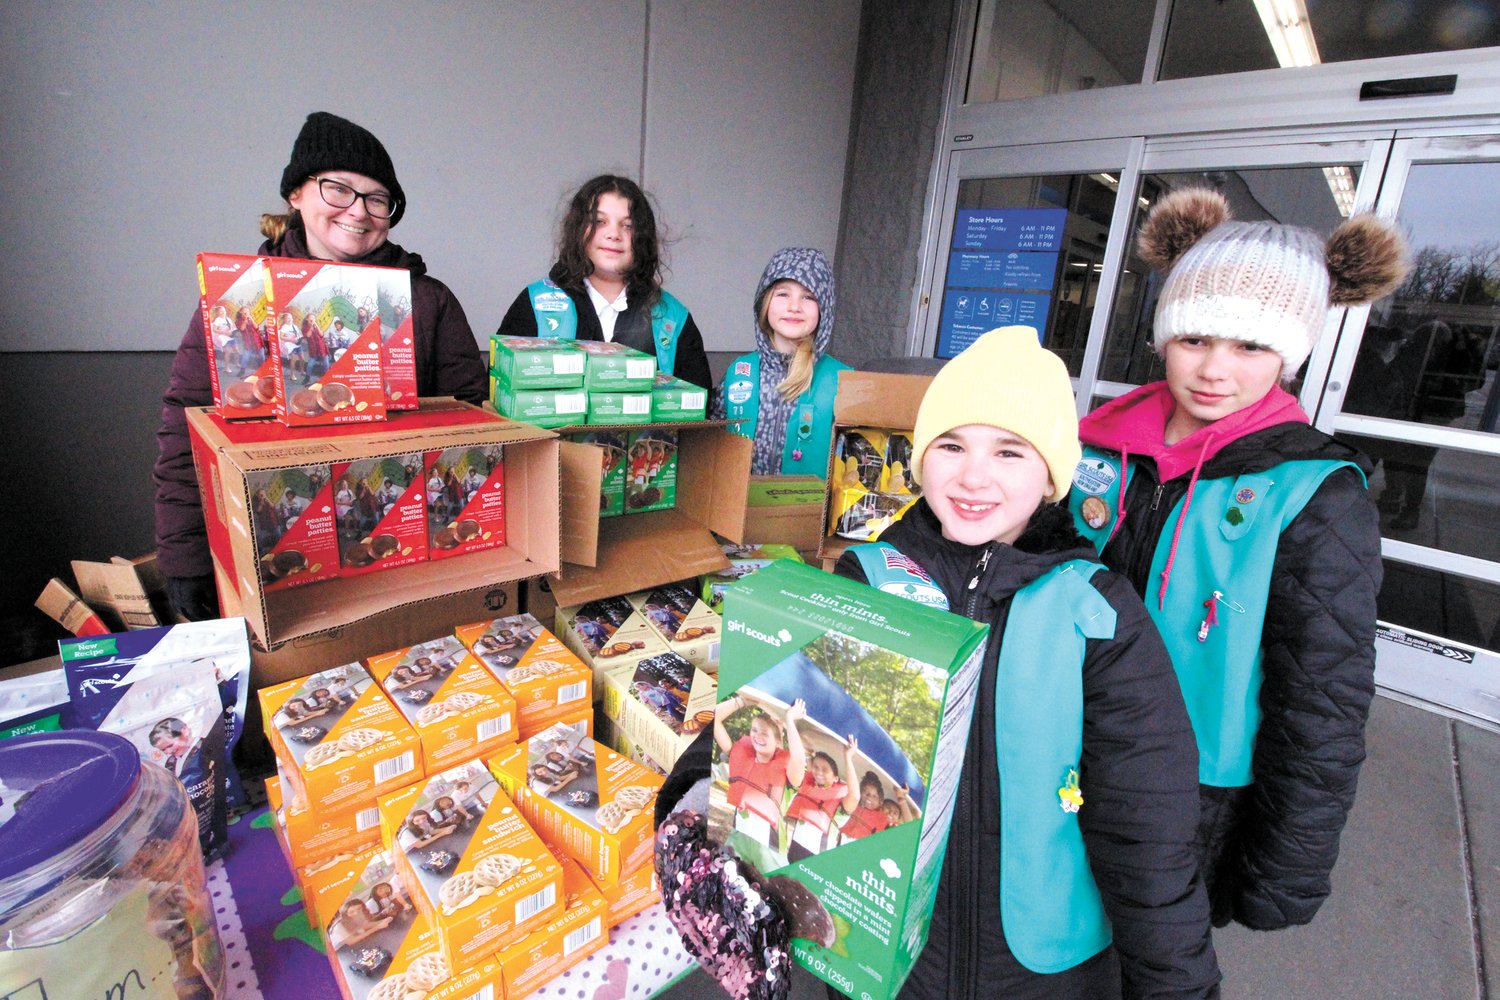 Rhode Island Mall Walmarrt  shoppers found it difficult to resist the treats as they left the store Saturday morning. Girl Scout Troop 79 Warwick had an expansive display of cookies to choose from. Sales enable the girls to go on camping trips and provide for enrichment activities.  Cookies are $5 a box. Pictured from left with troop leader Bobbie J. Gemma are Olivia Froman, Jocelyn Anderson,  and in foreground Aundrea Gemma and Paige Murphy. Thin mints, as displayed here, continue to be a favorite. (Warwick Beacon photo)